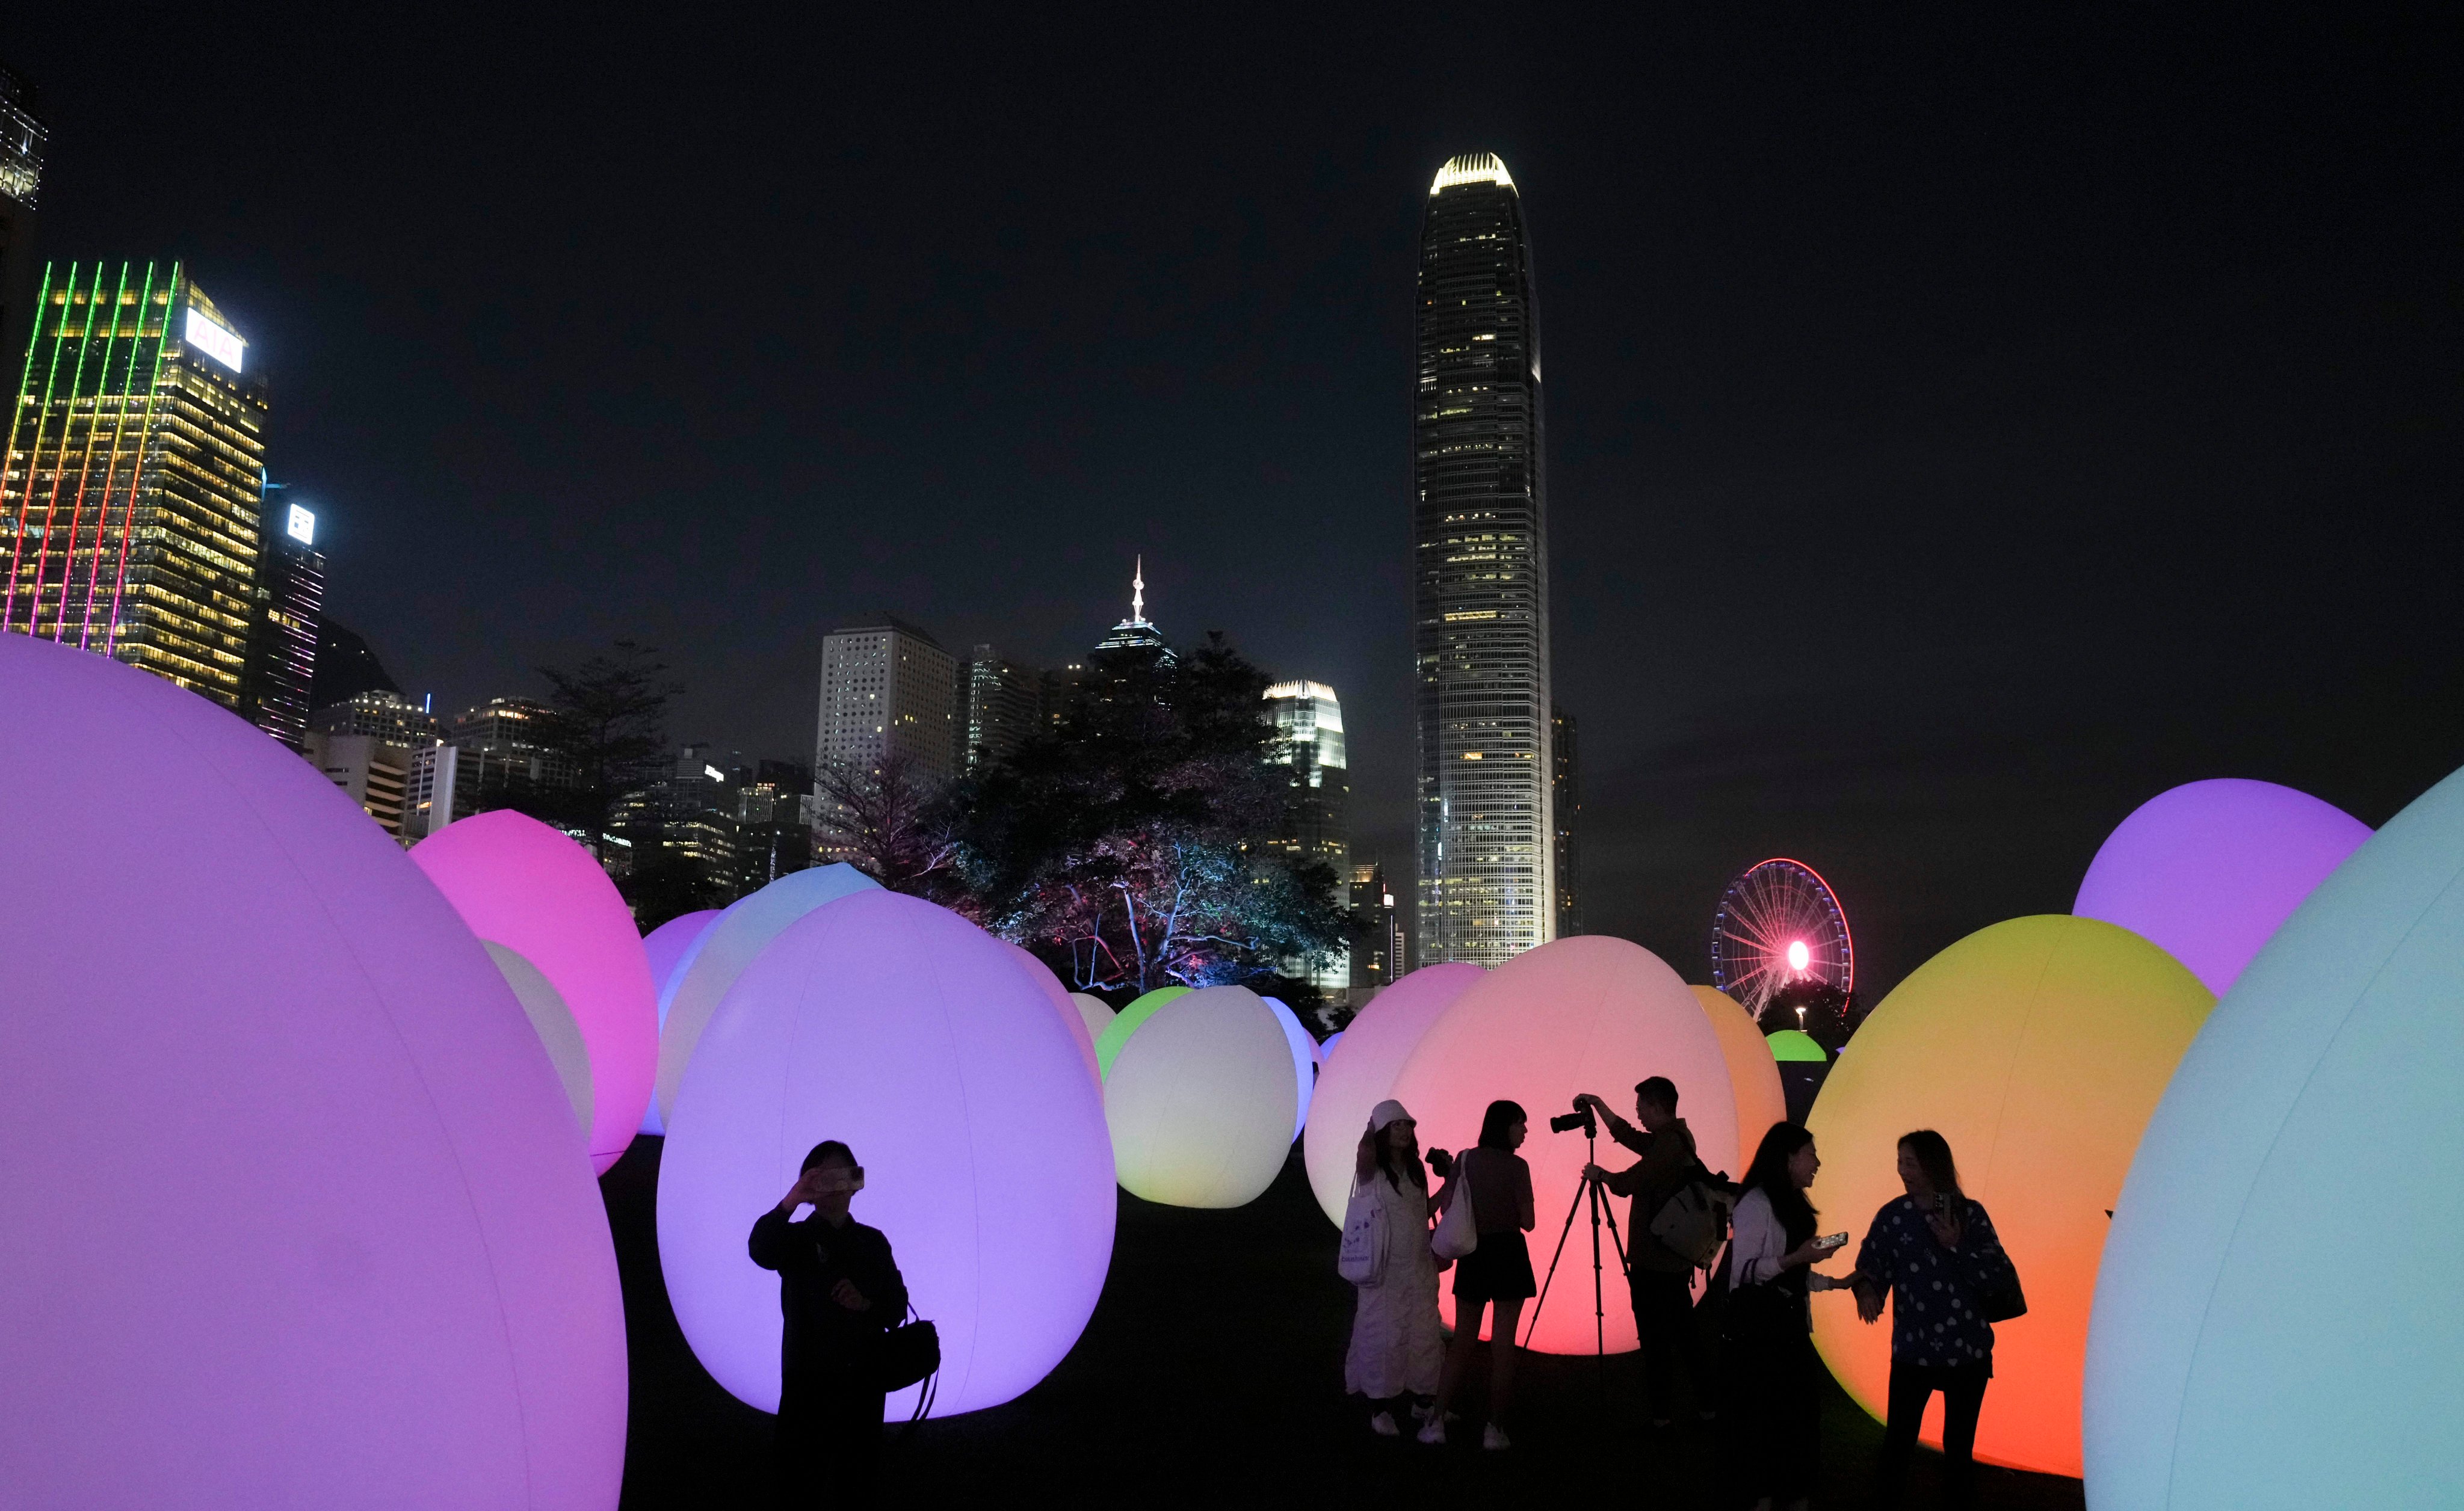 Revellers can take in the sights of the “Continuous” exhibition at Victoria Harbour during the Easter break. Photo: Sam Tsang